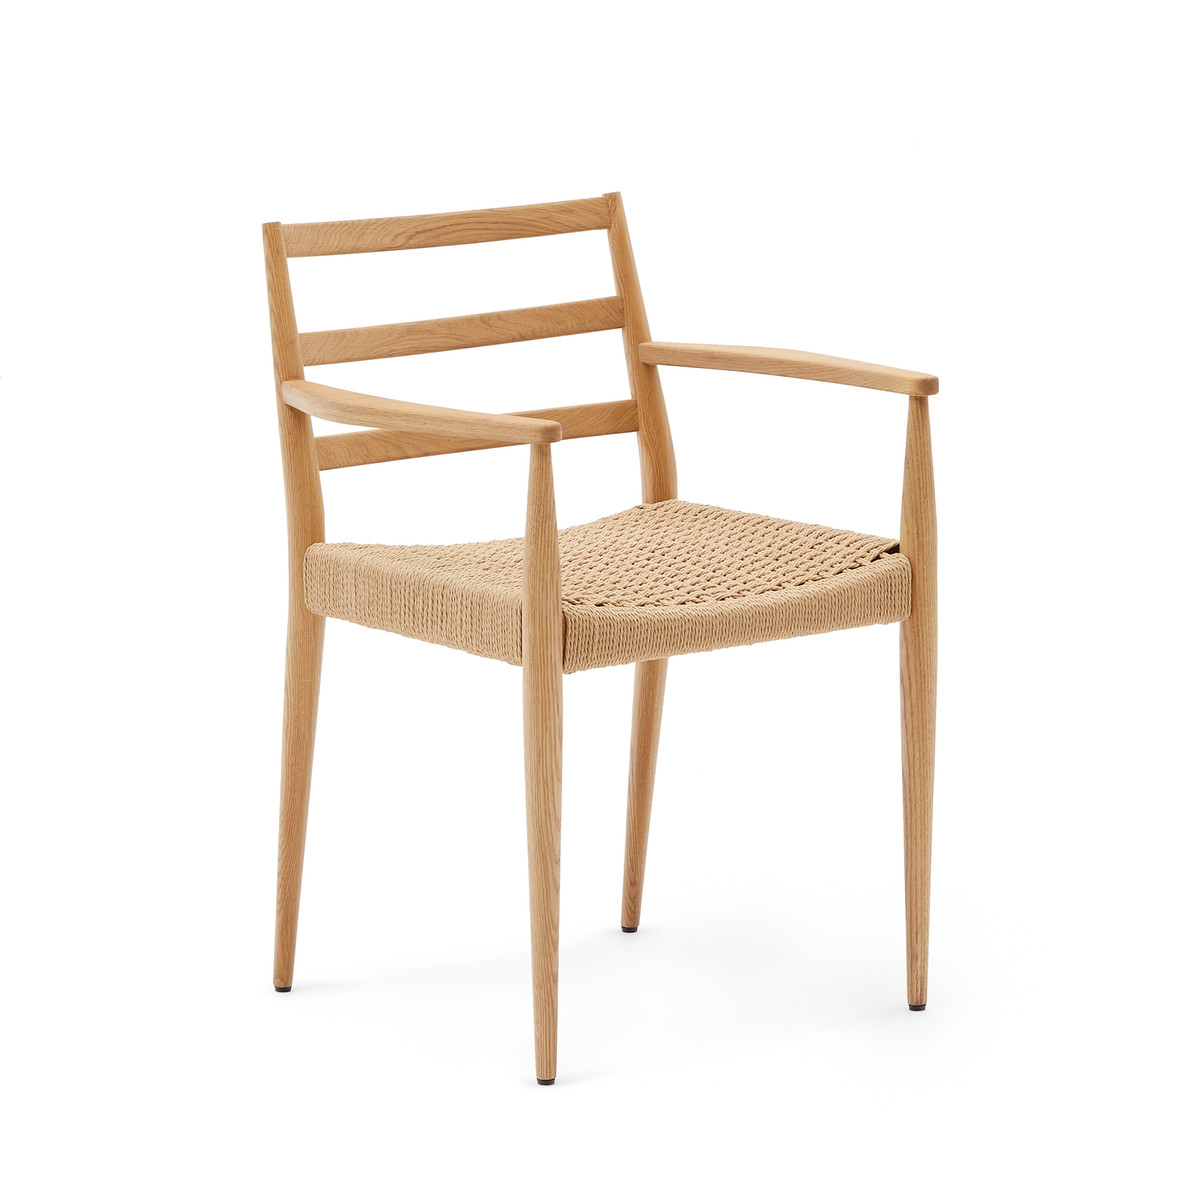 Analy Oak - Analy Oak Dining Chair - Natural